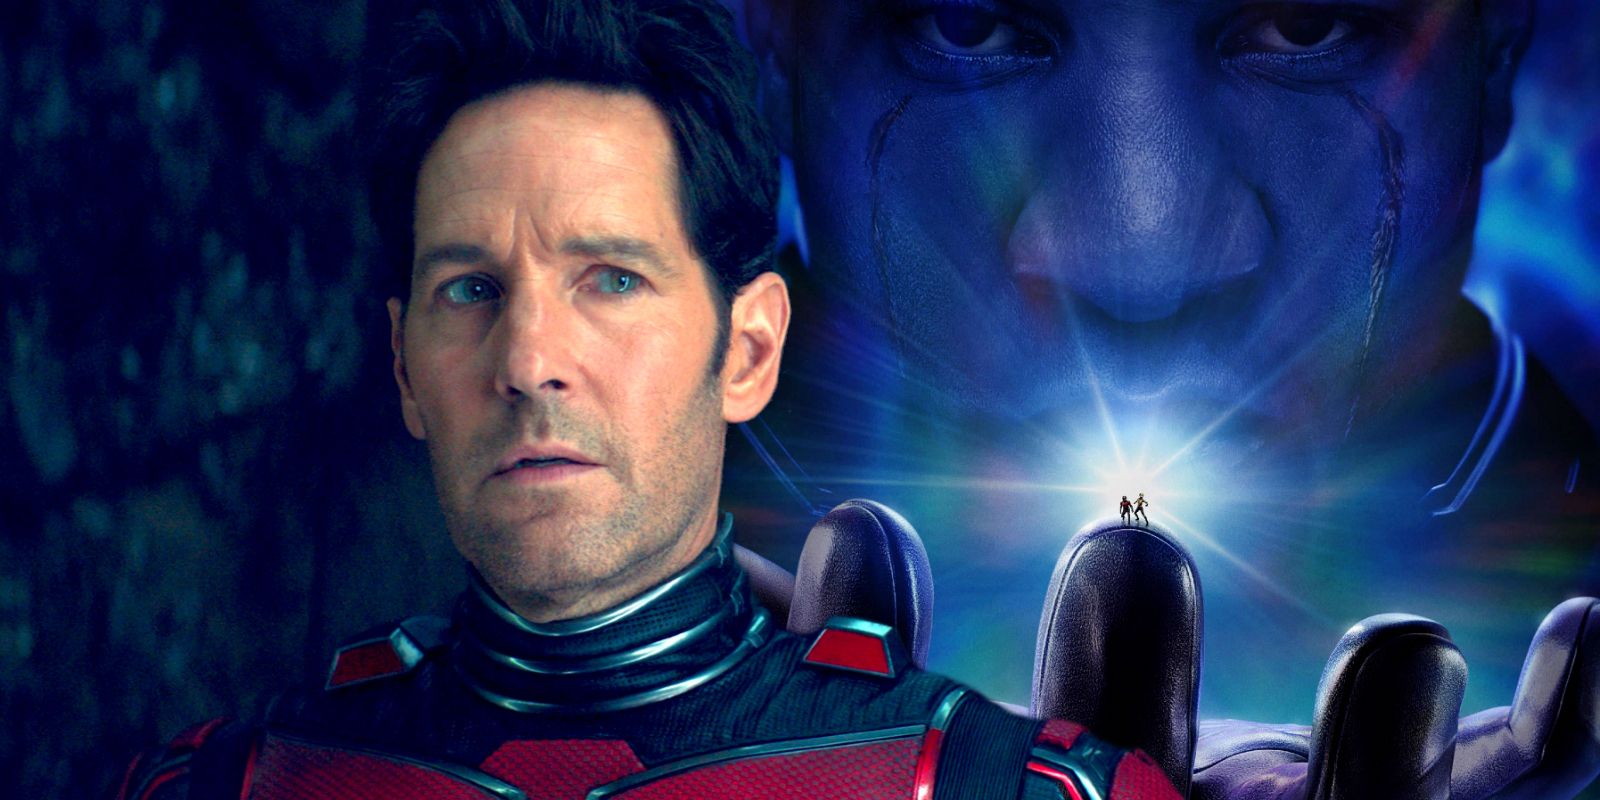 Paul Rudd as Scott Lang alongside the Ant-man and the Wasp: Quantumania poster